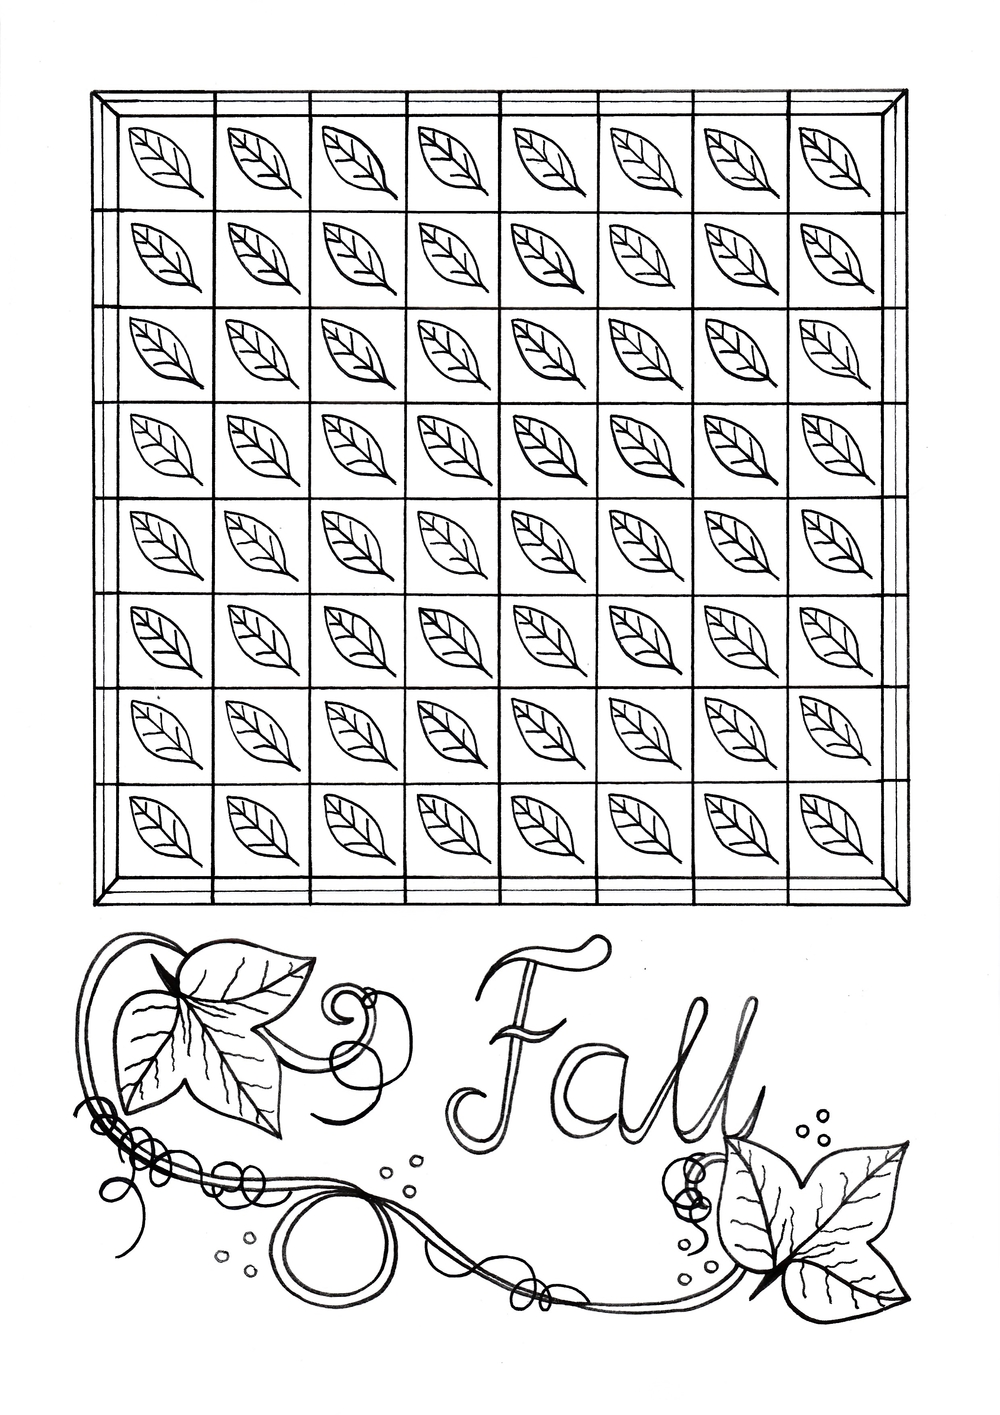 Download Mindless Fall Leaves Adult Coloring Page | FaveCrafts.com